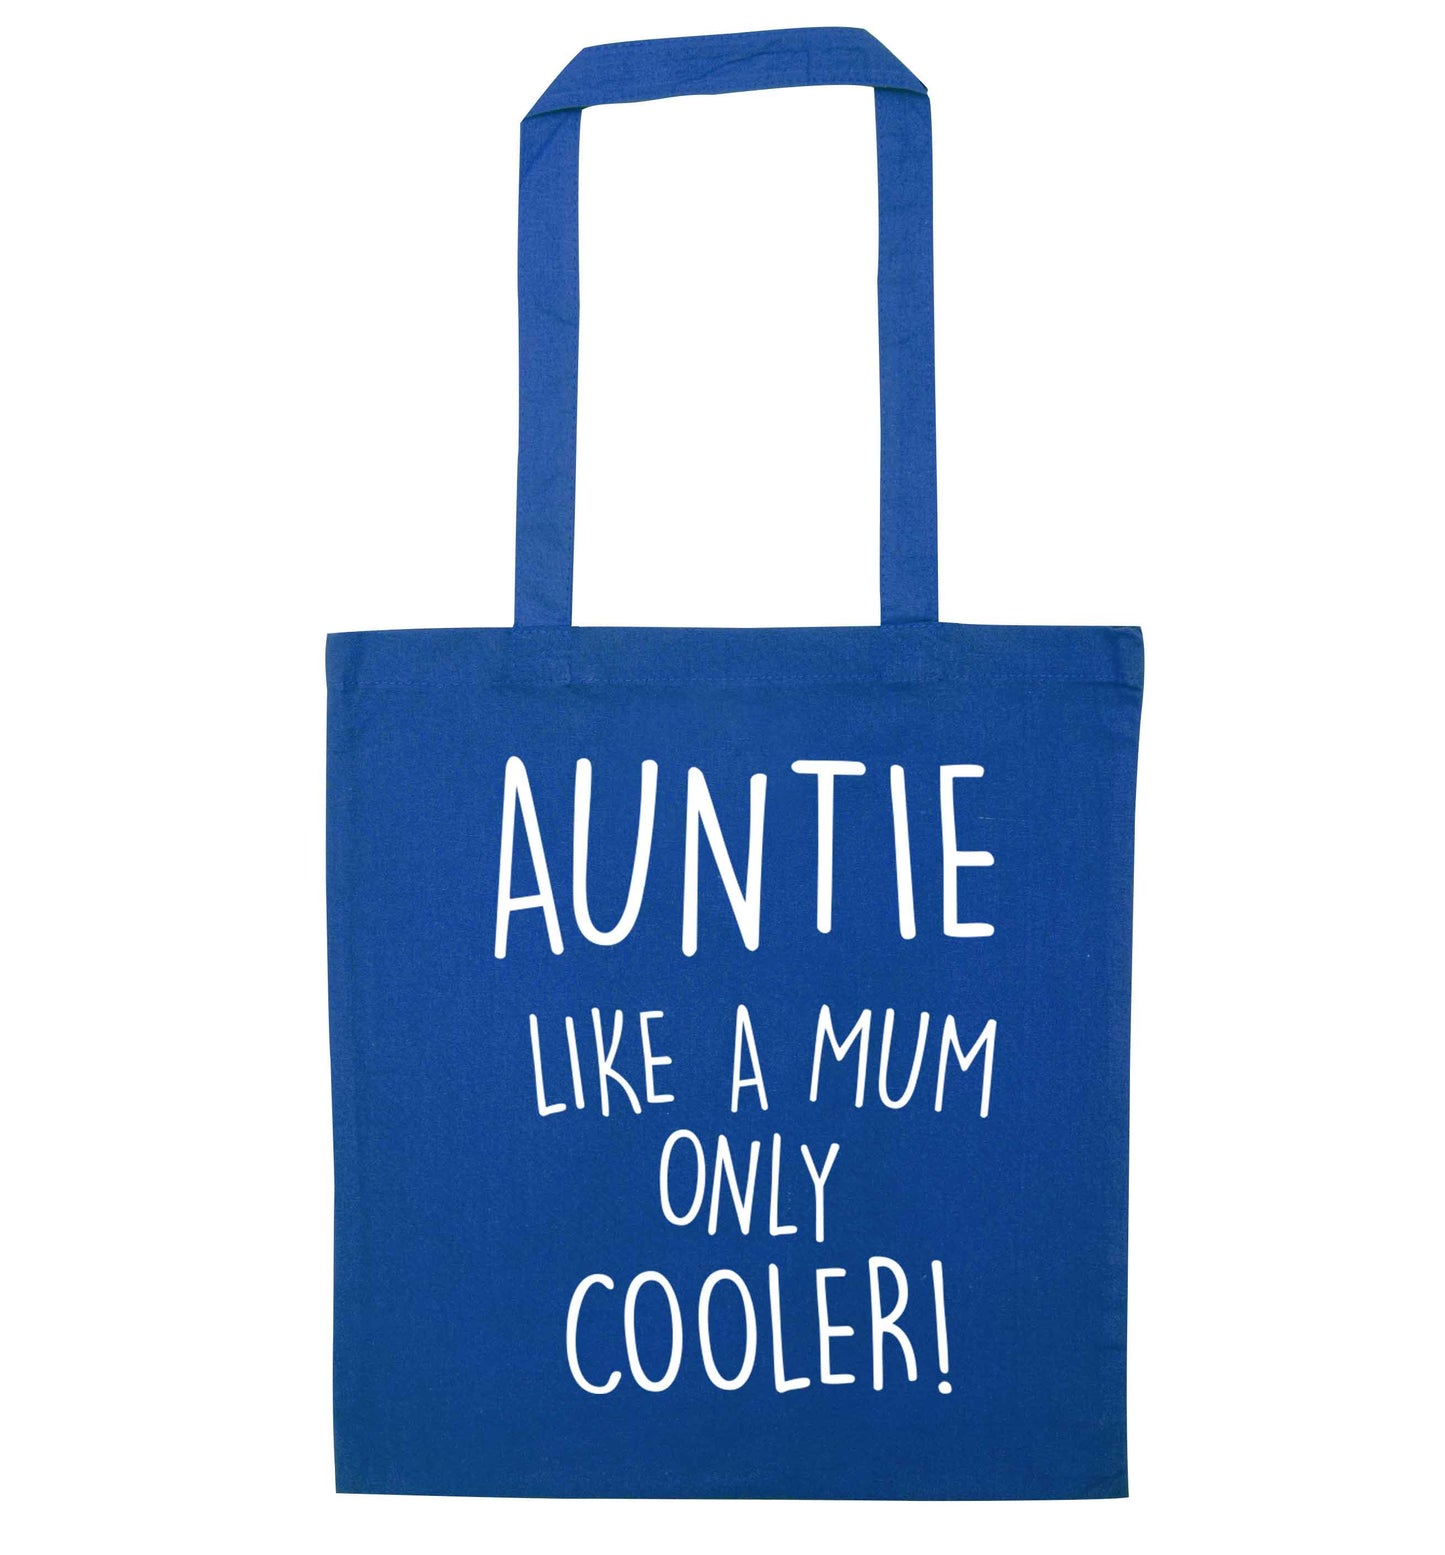 Auntie like a mum only cooler blue tote bag